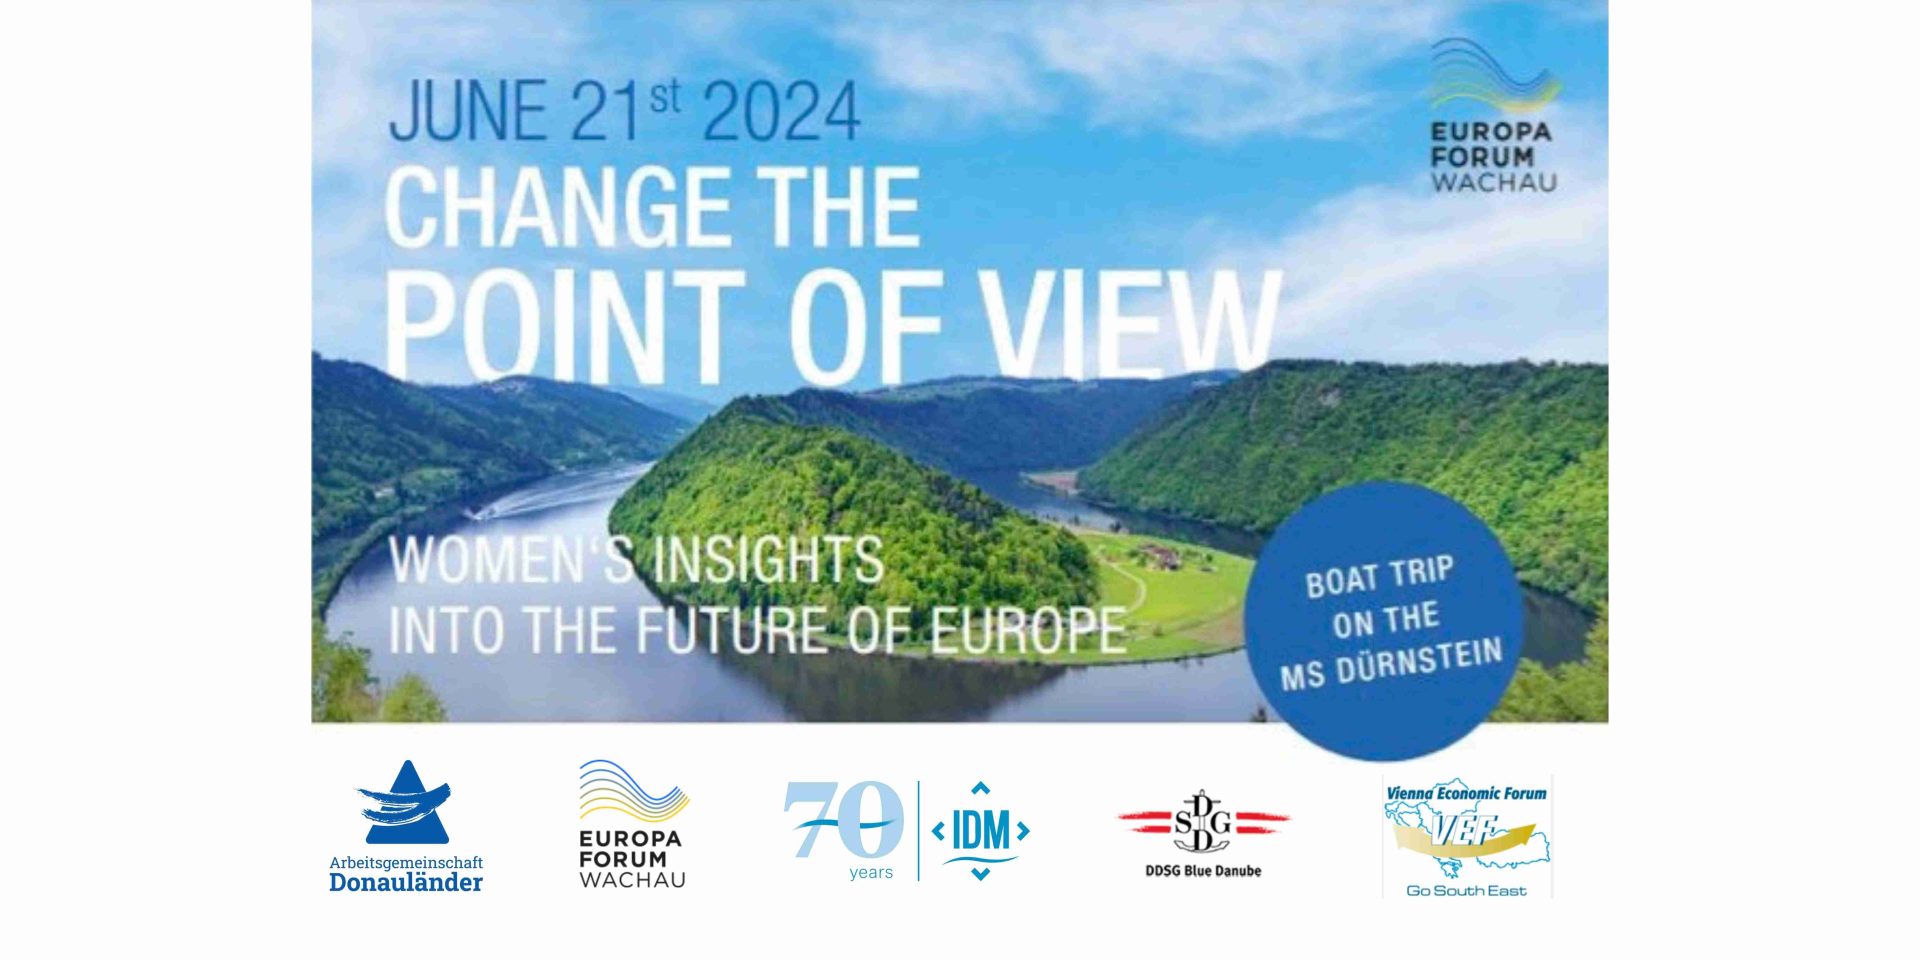 Danube Salon at Europa-Forum Wachau 2024: CHANGE THE POINT OF VIEW - Women‘s Insights into the Future of Europe 